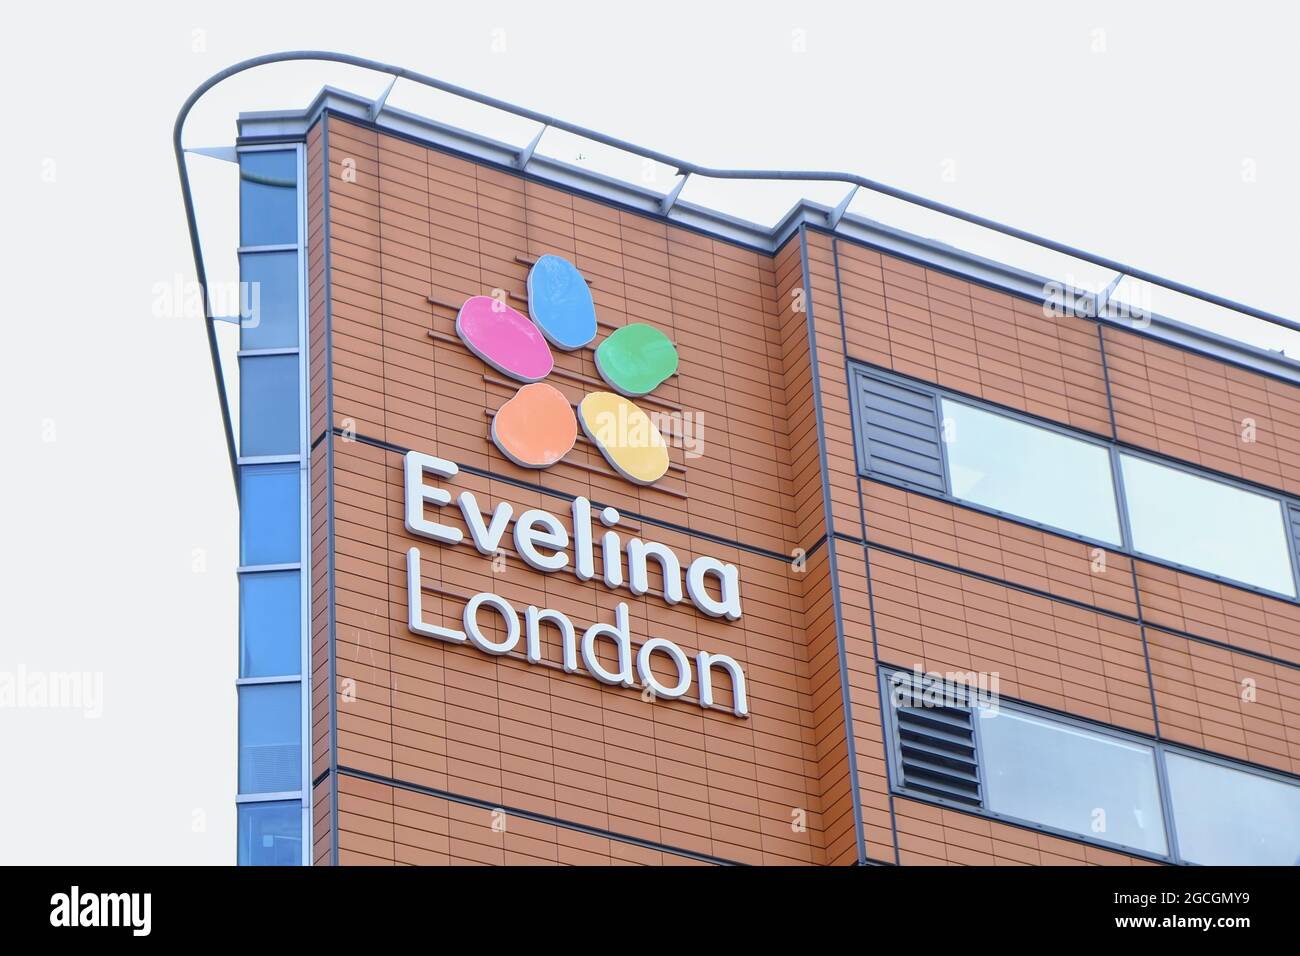 London, UK. The Evelina London Children's Hospital specialist hospital part of Guy's and St Thomas' Foundation NHS Trust. Stock Photo